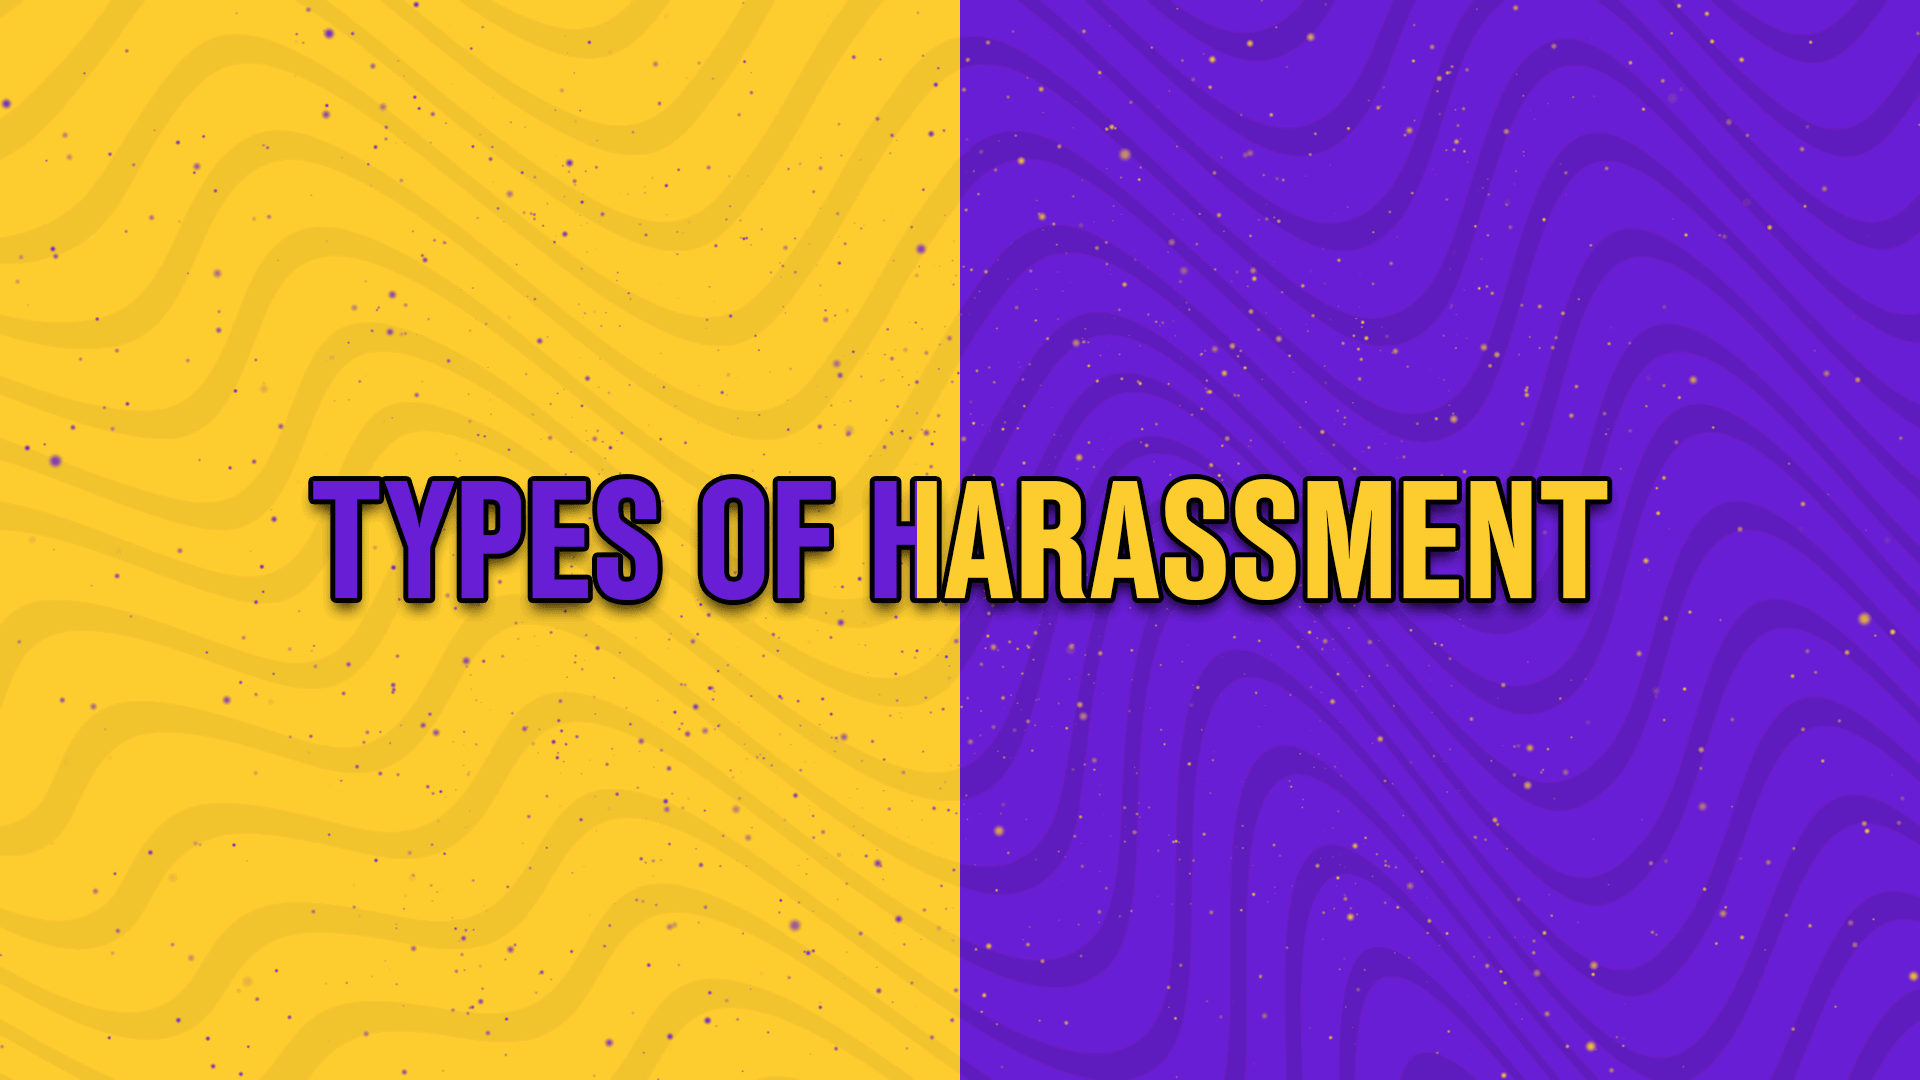 Types of harassment - StreamBee